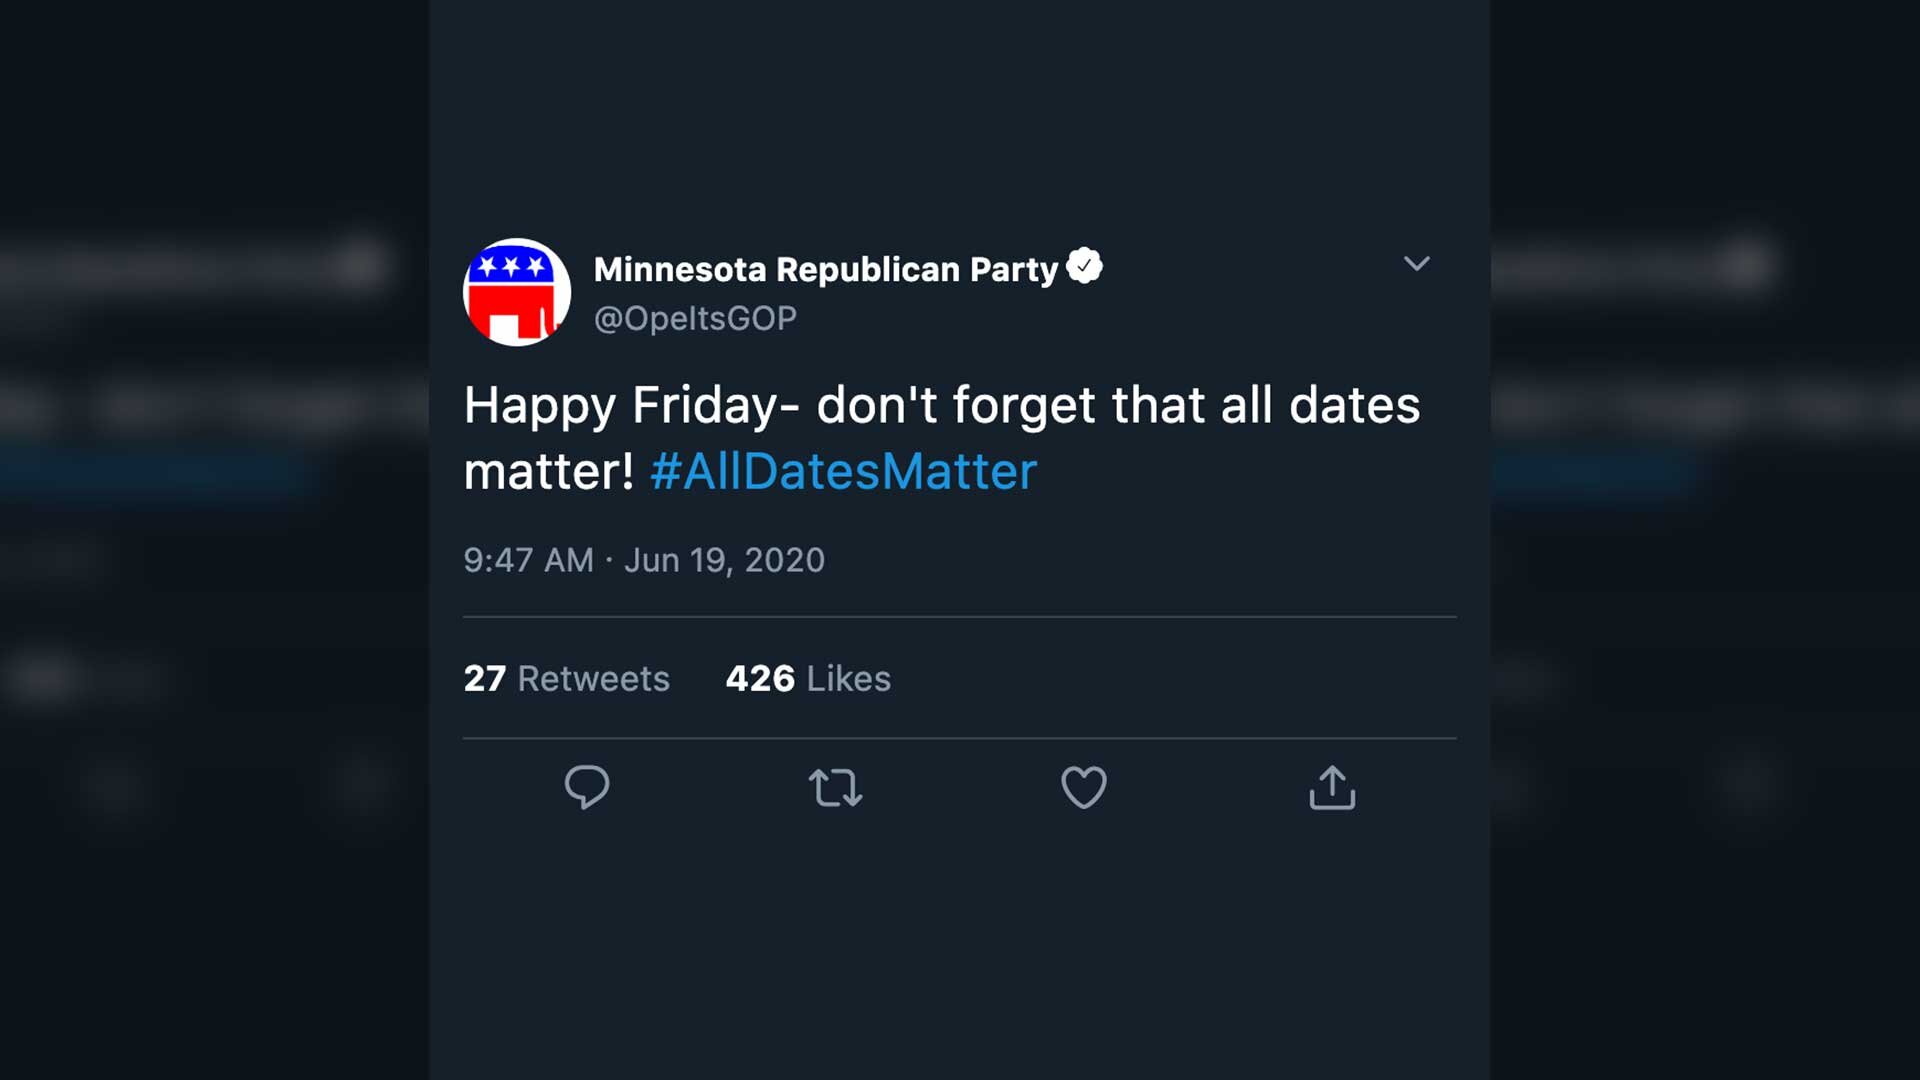 MN-GOP-Commemorates-Juneteenth-by-Tweeting-All-Dates-Matter.jpg